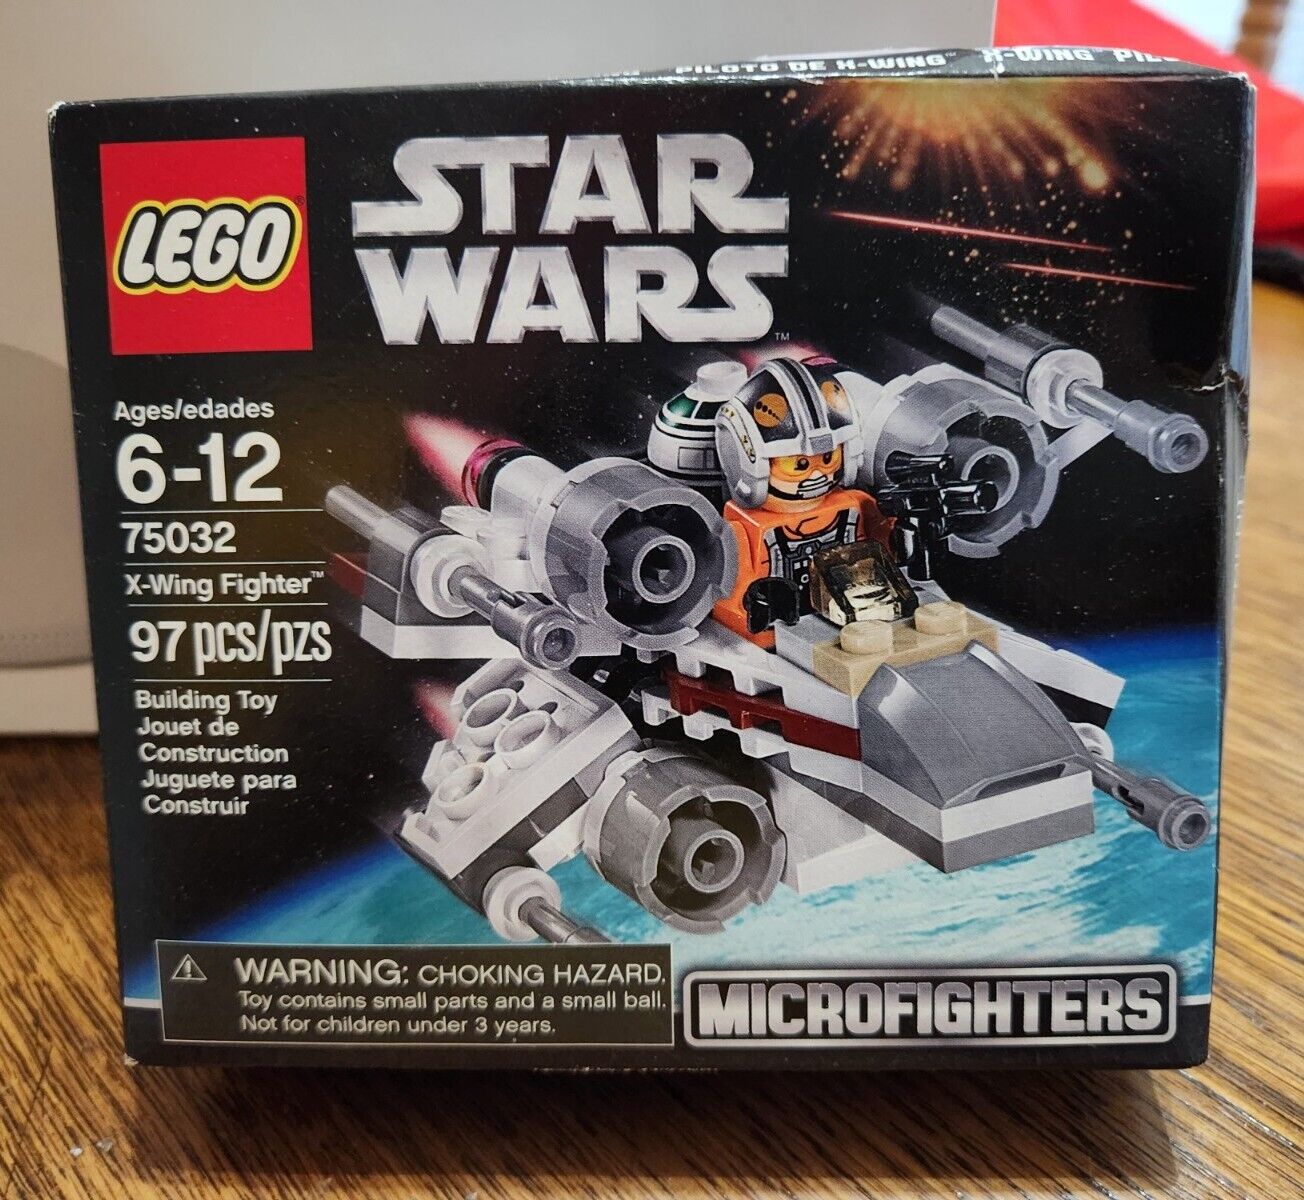 LEGO Star Wars: X-wing Fighter Microfighter (75032) Sealed In Box